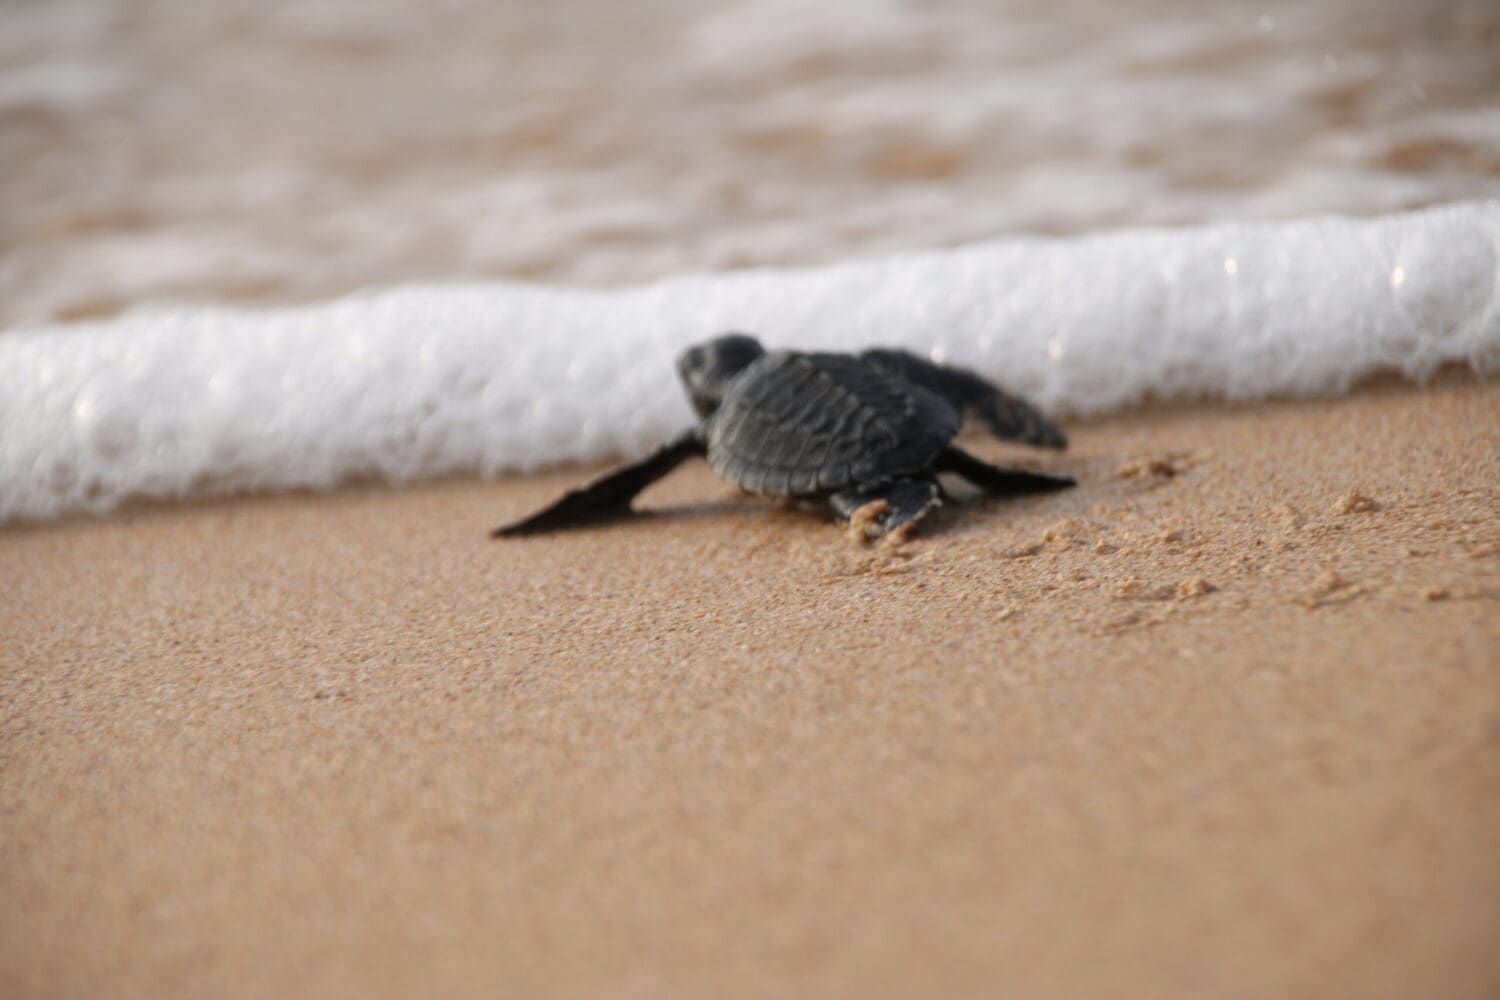 Releasing baby turtles back into the ocean